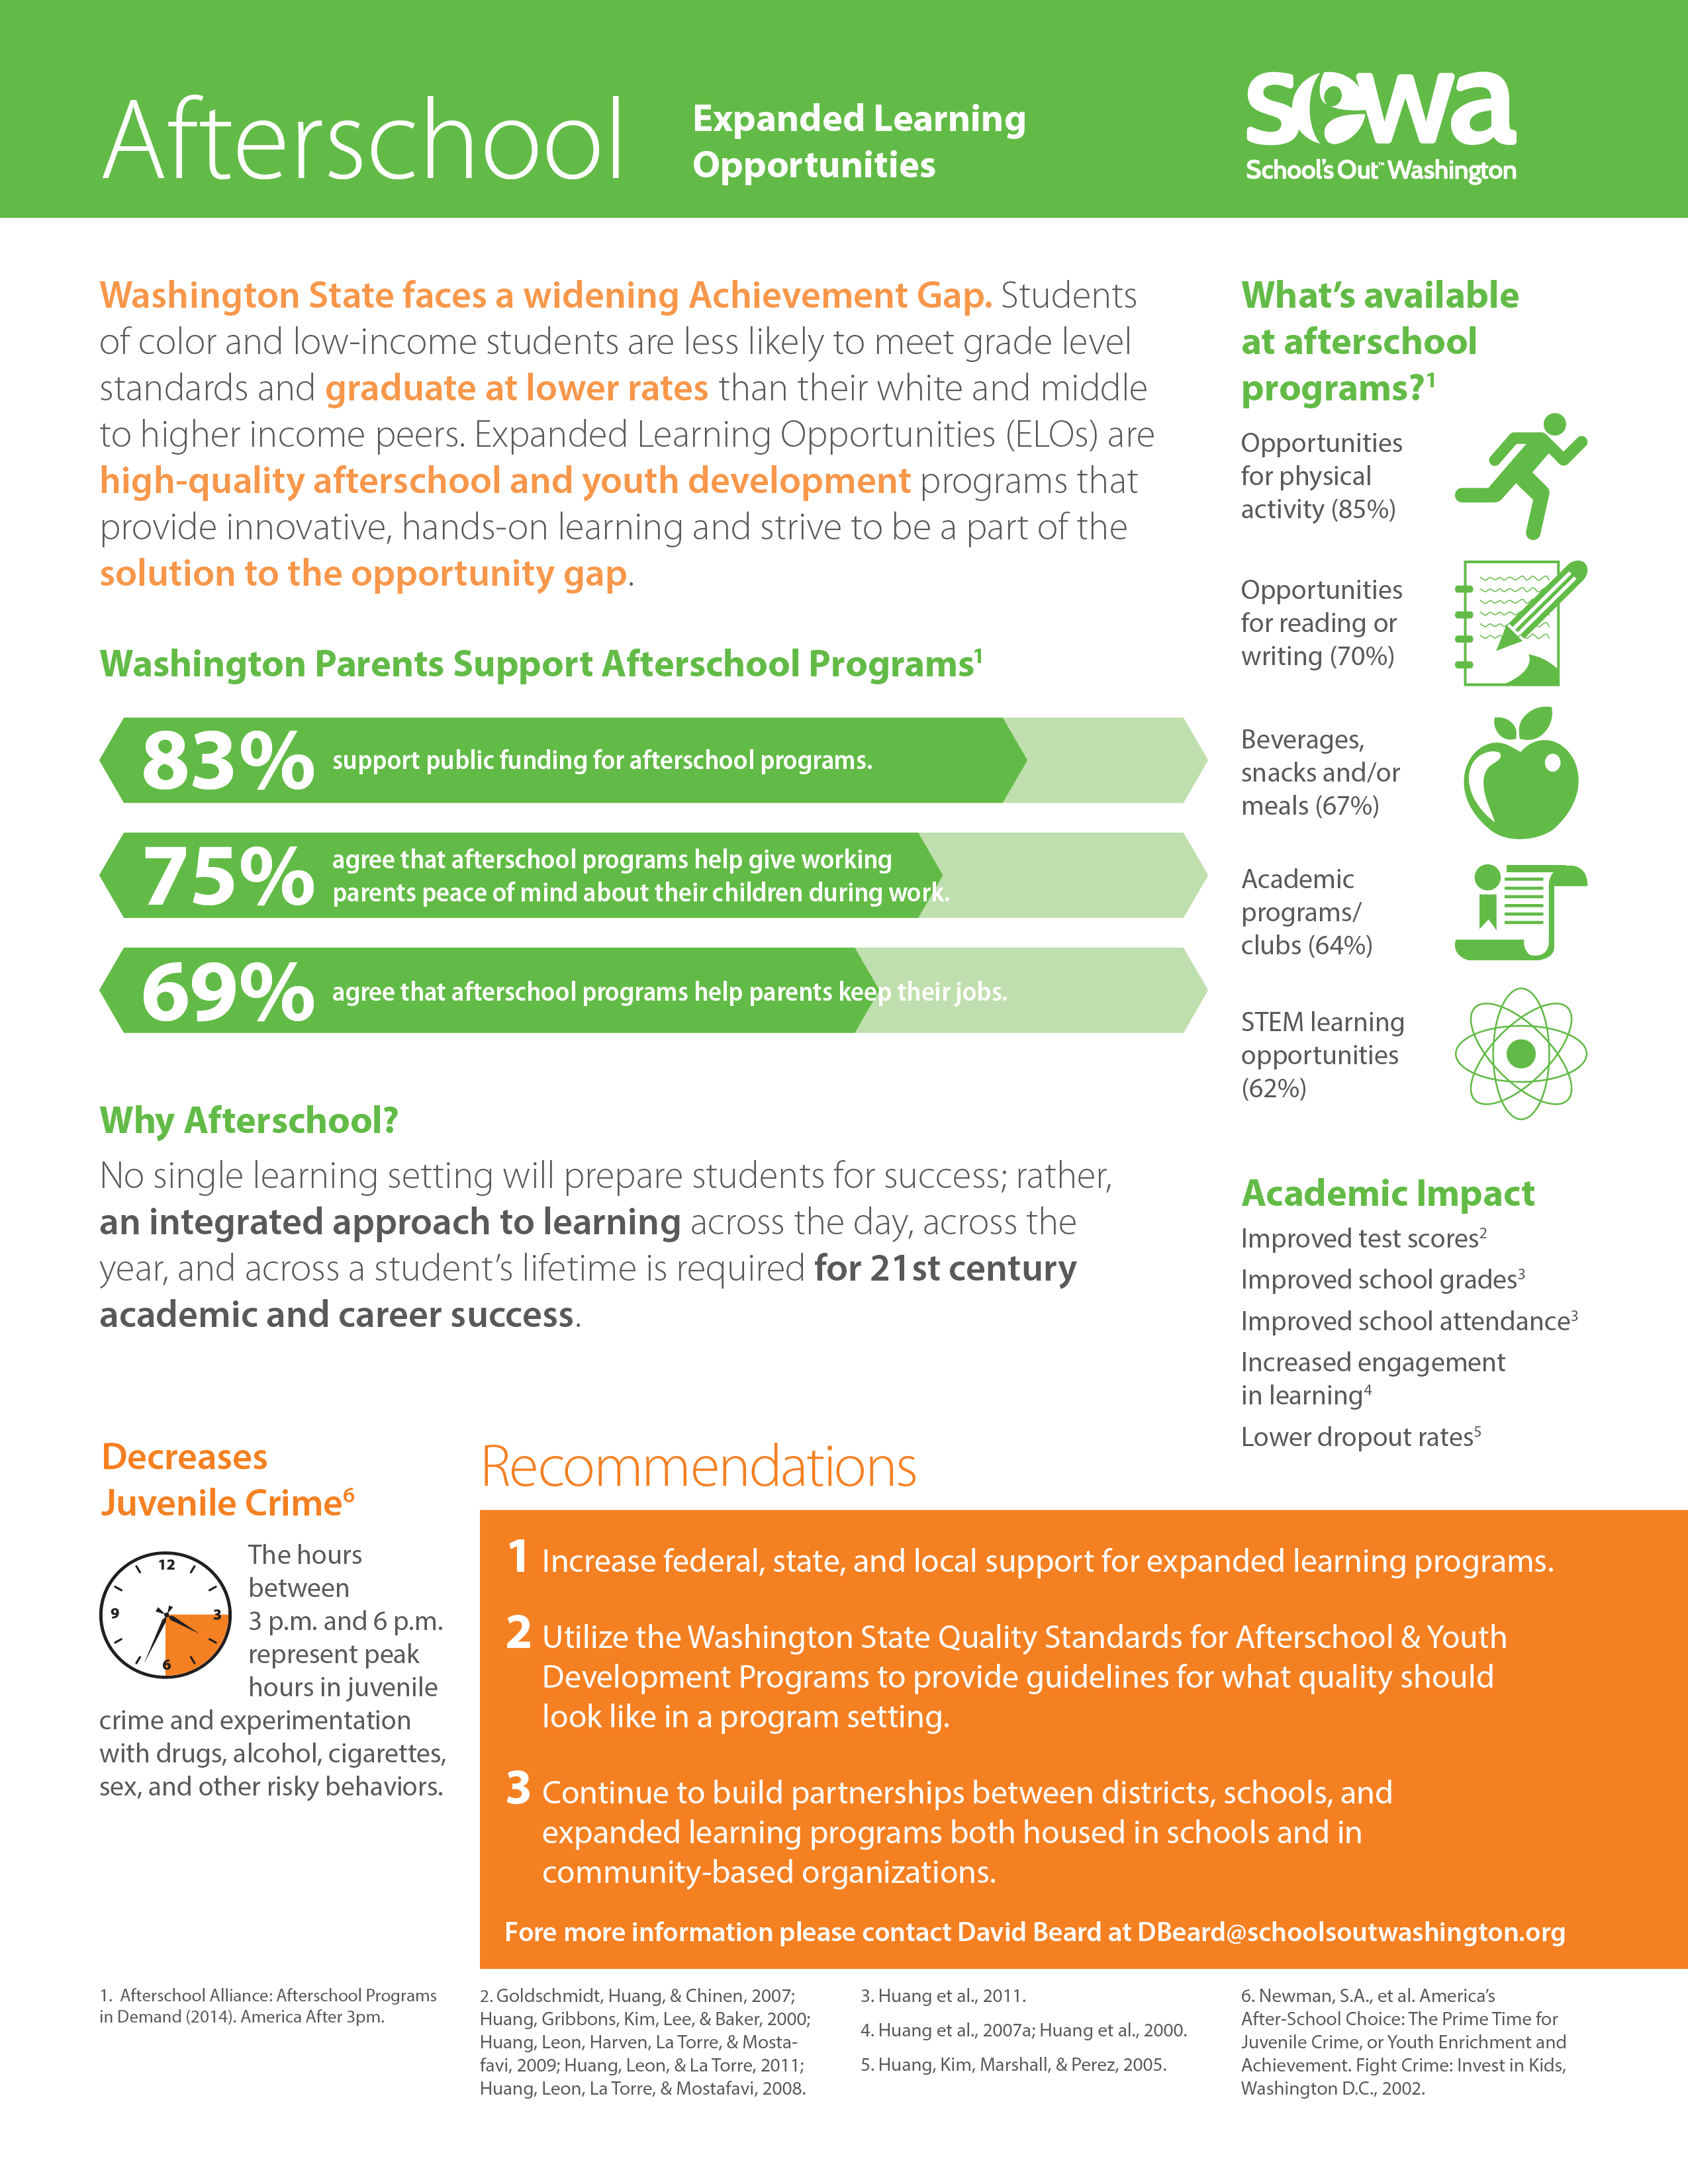 facts about after school learning in Washington